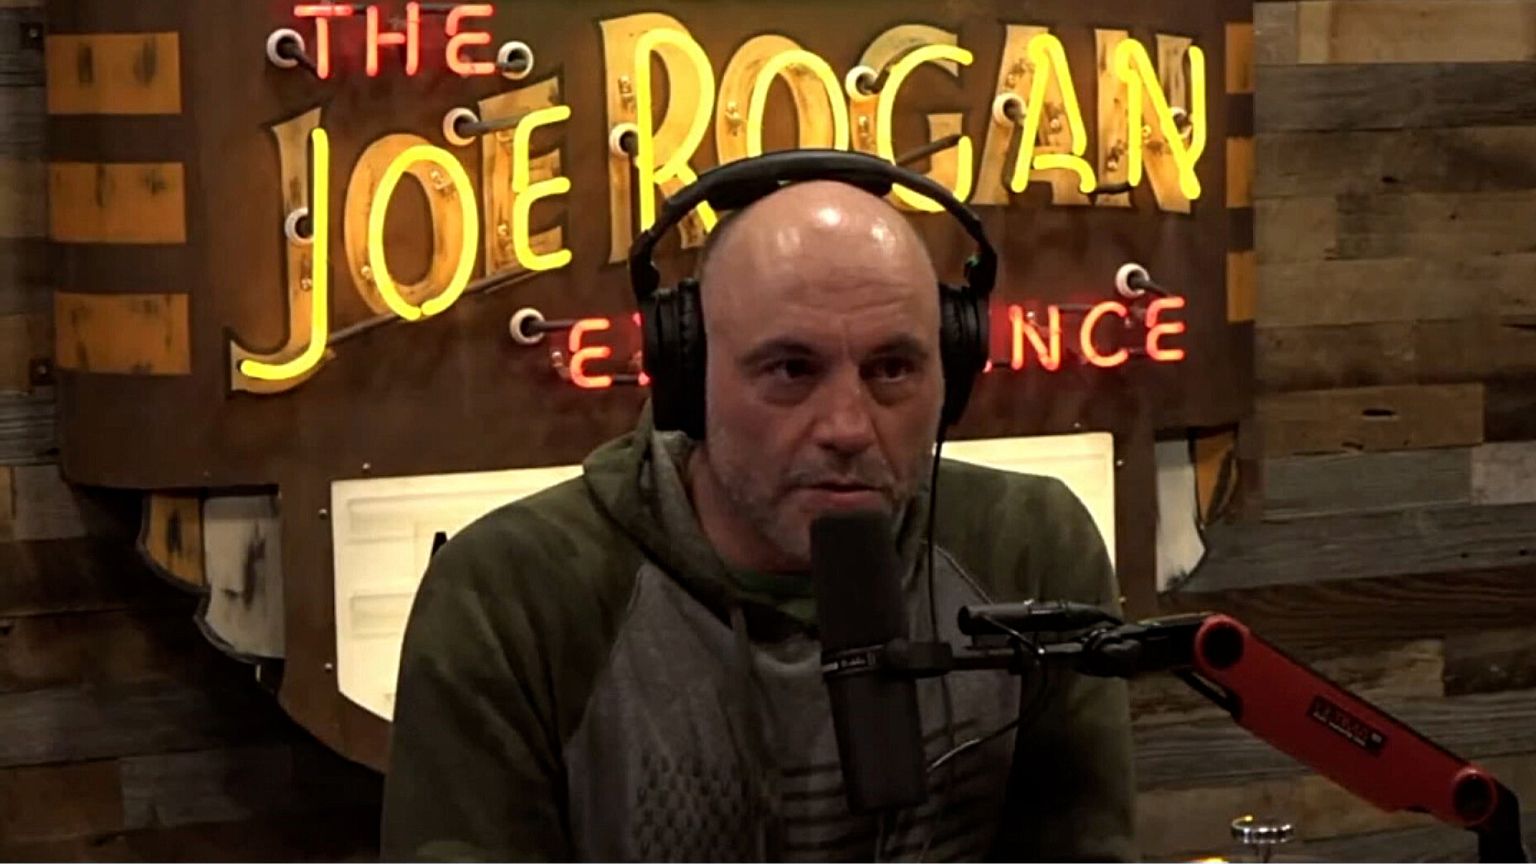 Only a third of the signatures of the Joe Rogan censorship demand letter were doctors